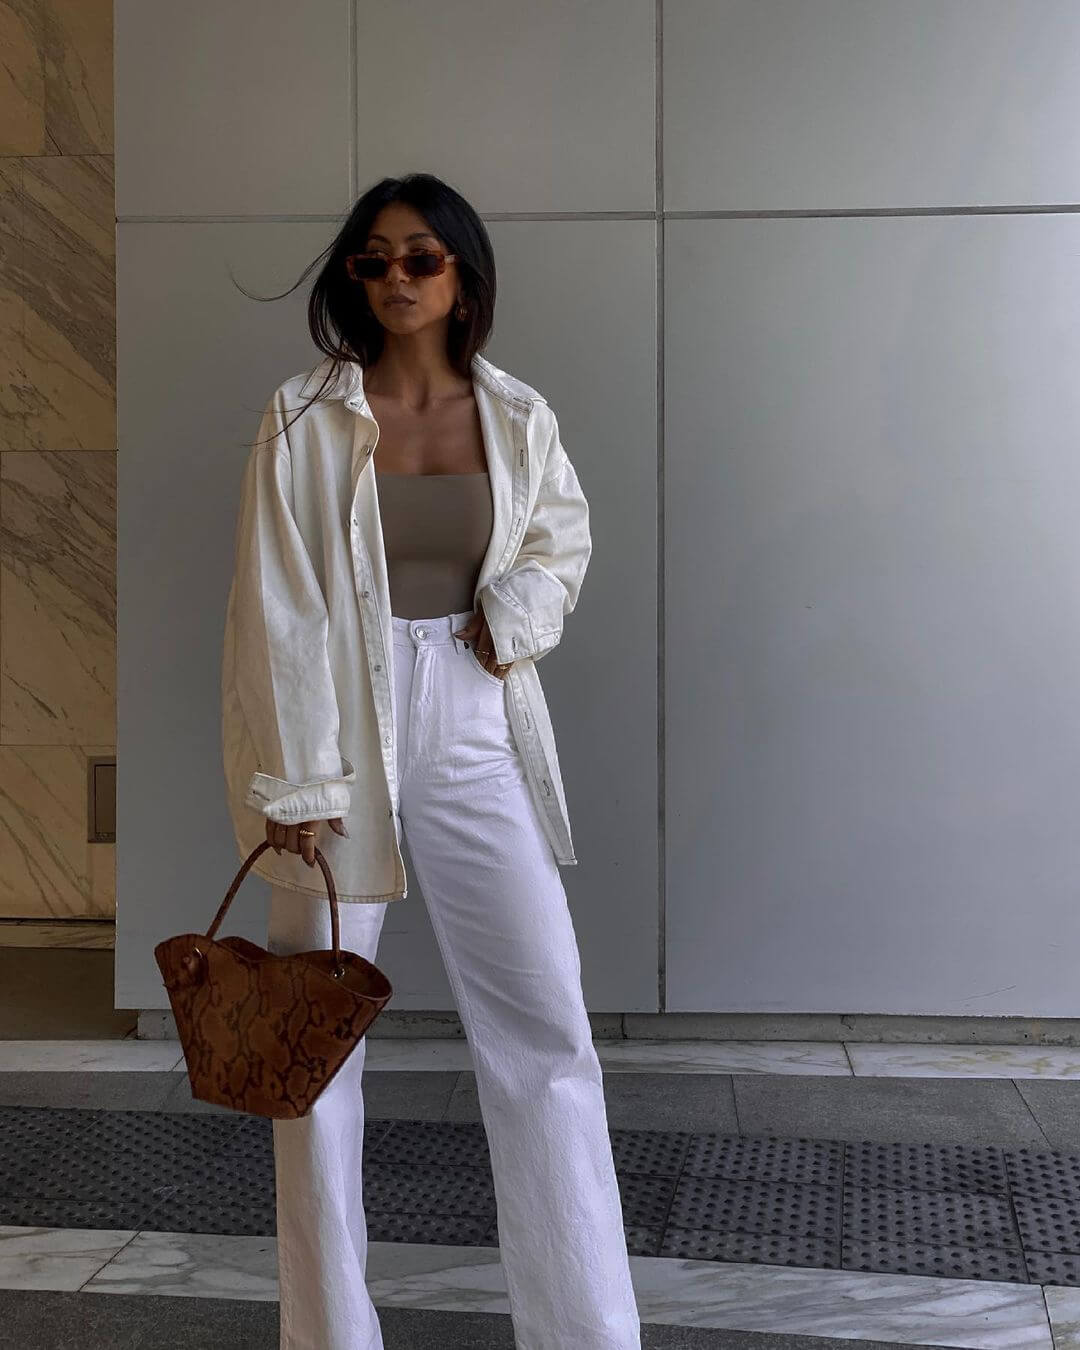 This Relaxed Outfit Is The Epitome Of Casual Chic